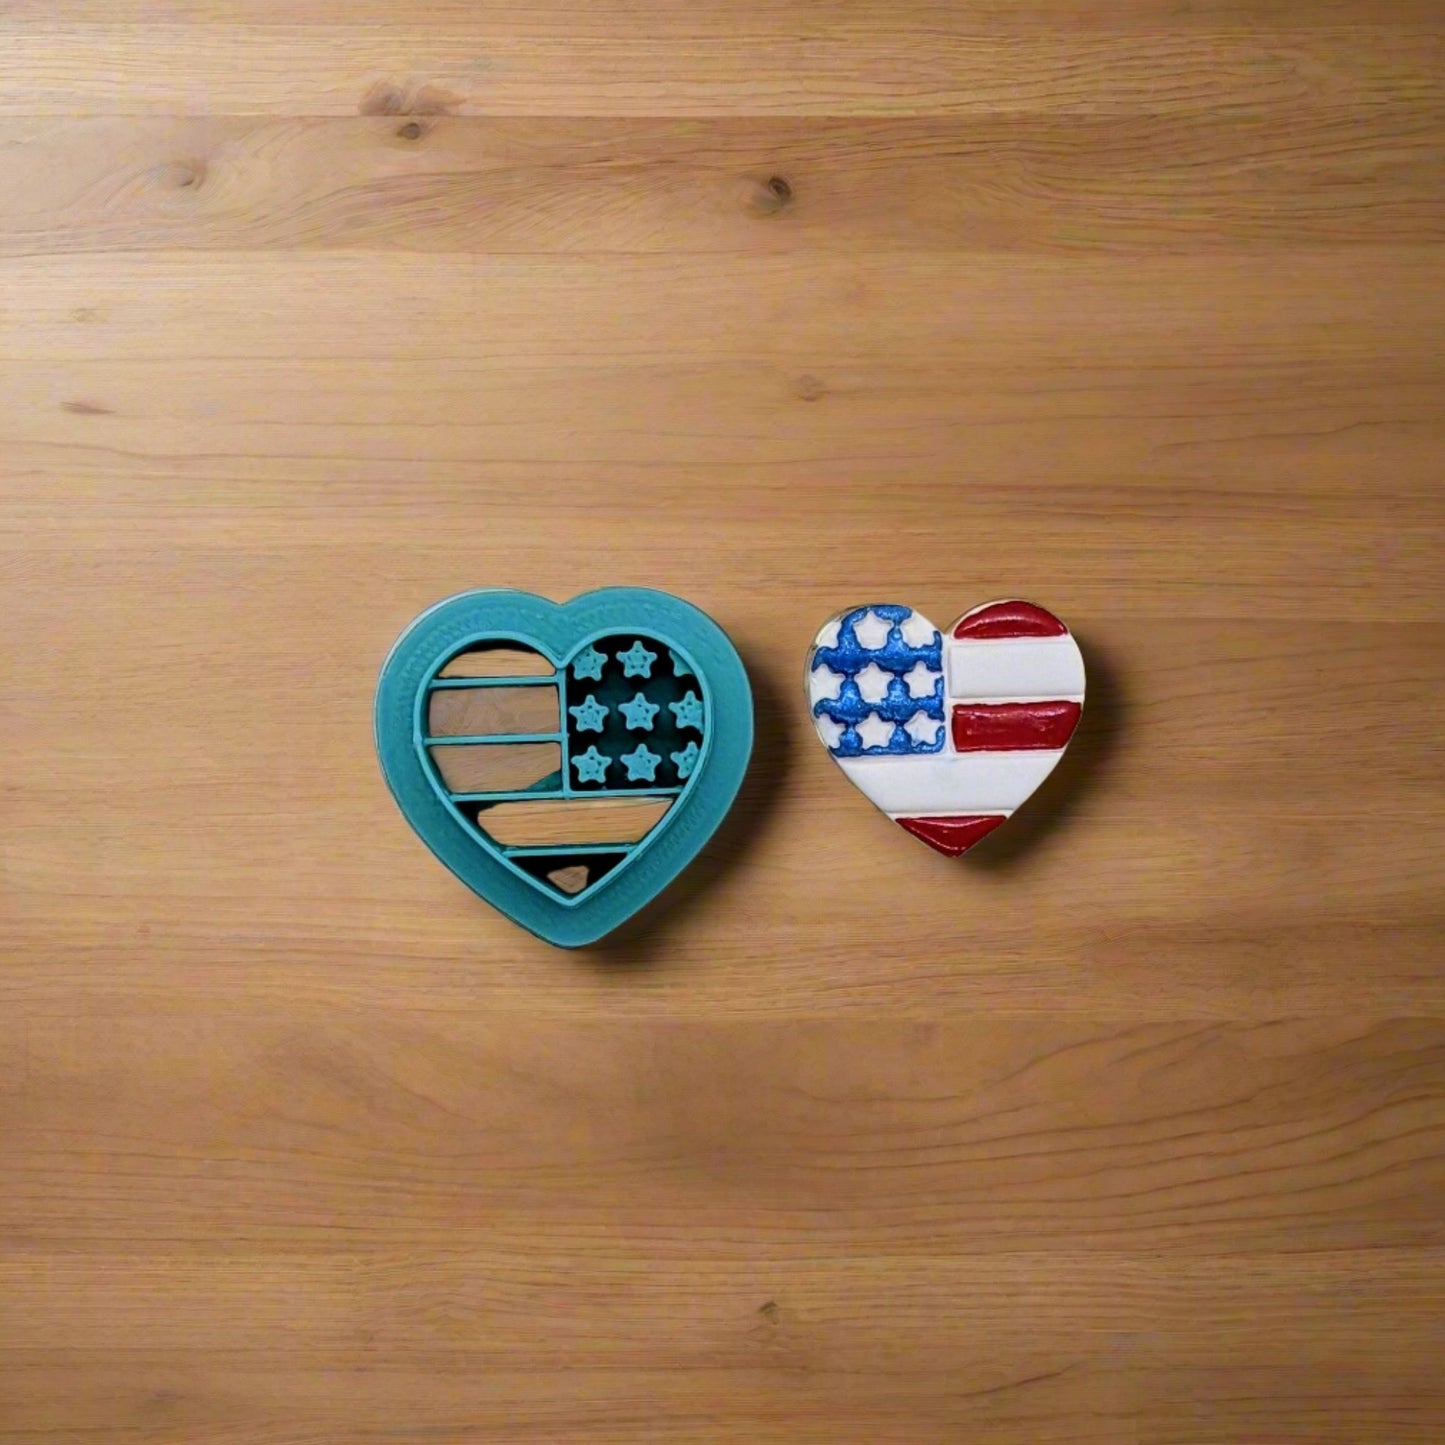 Heart Shape American Flag Cookie Cutter for Cookies, Ceramics, Pottery, Polymer Clay, Fondant - Multi-Medium Craft & Baking Tool